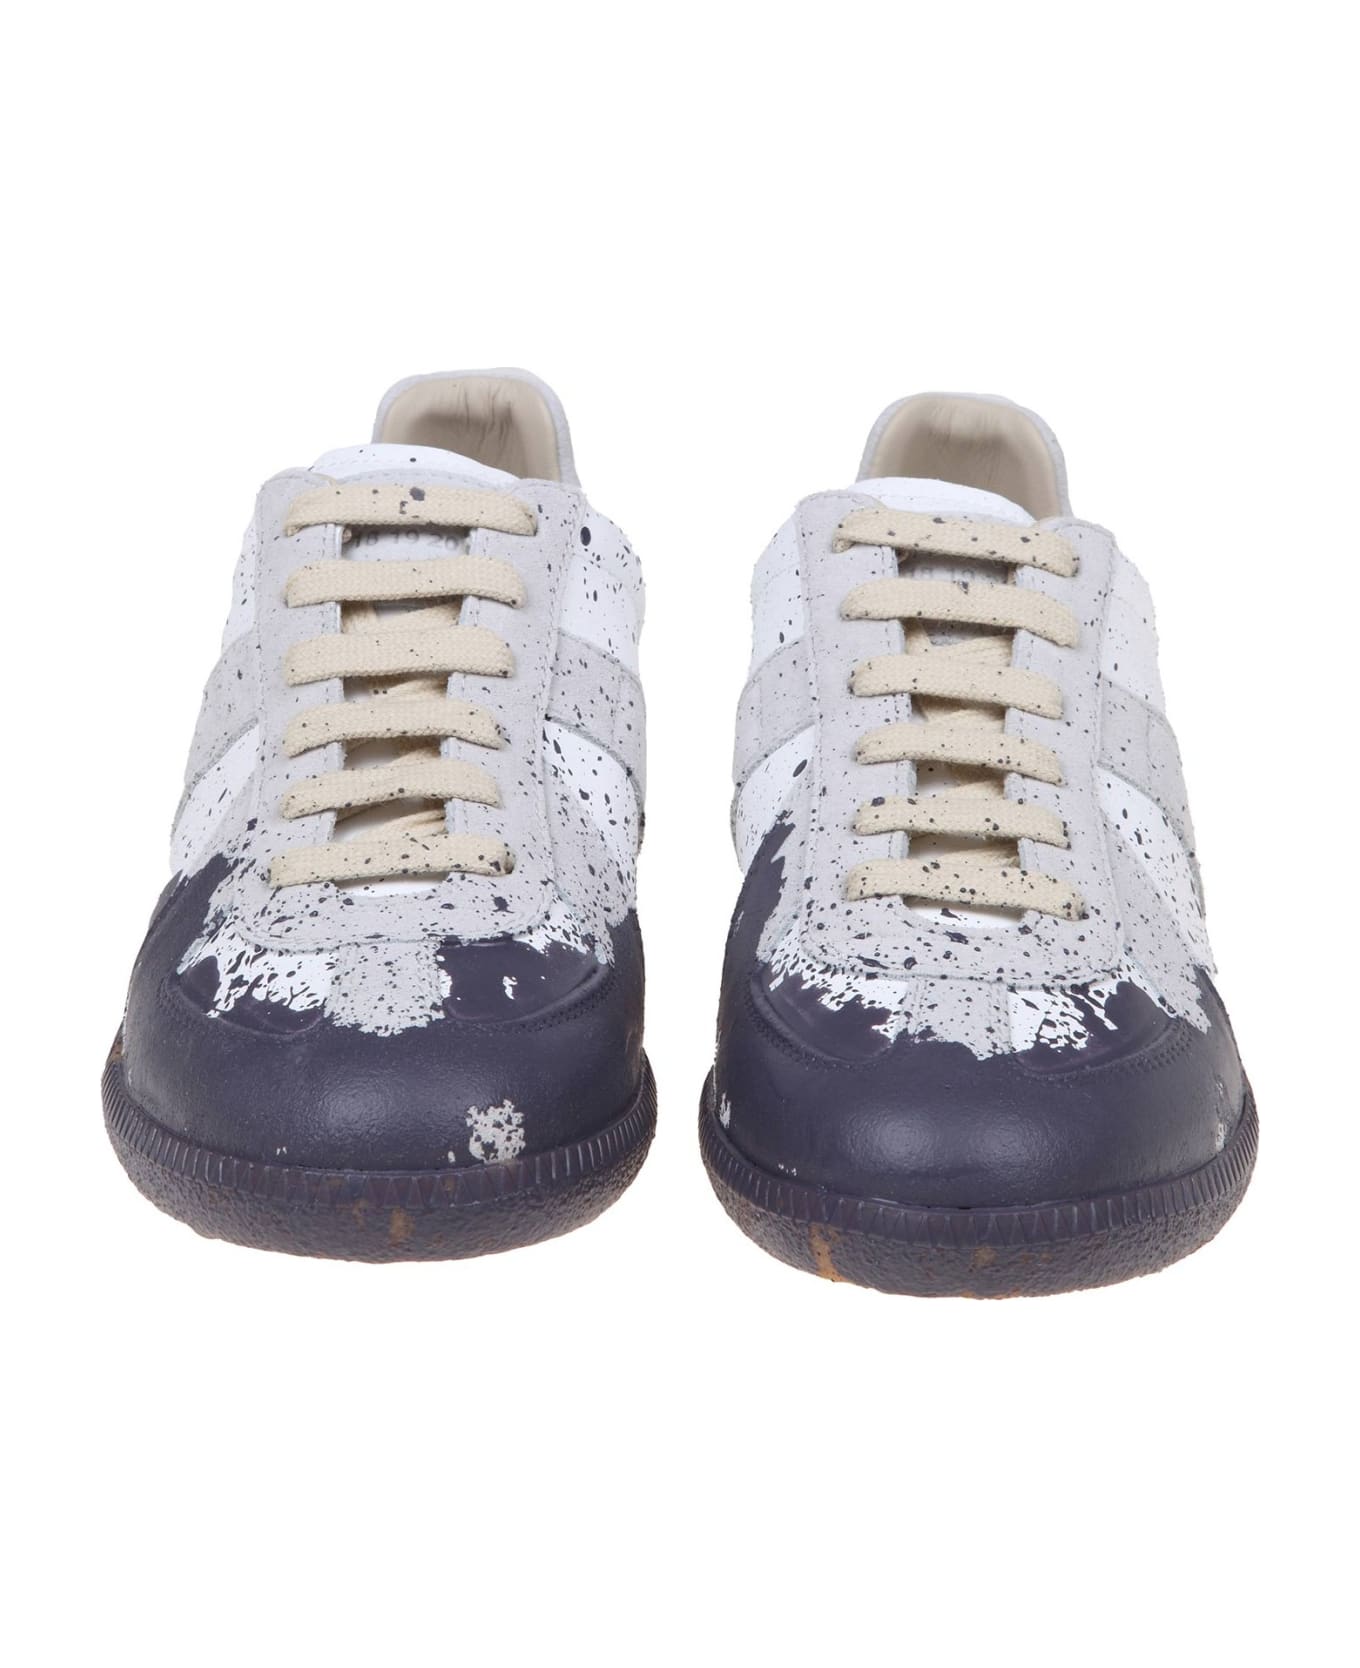 Maison Margiela Leather Sneakers With Paint Detail - White/Grey スニーカー